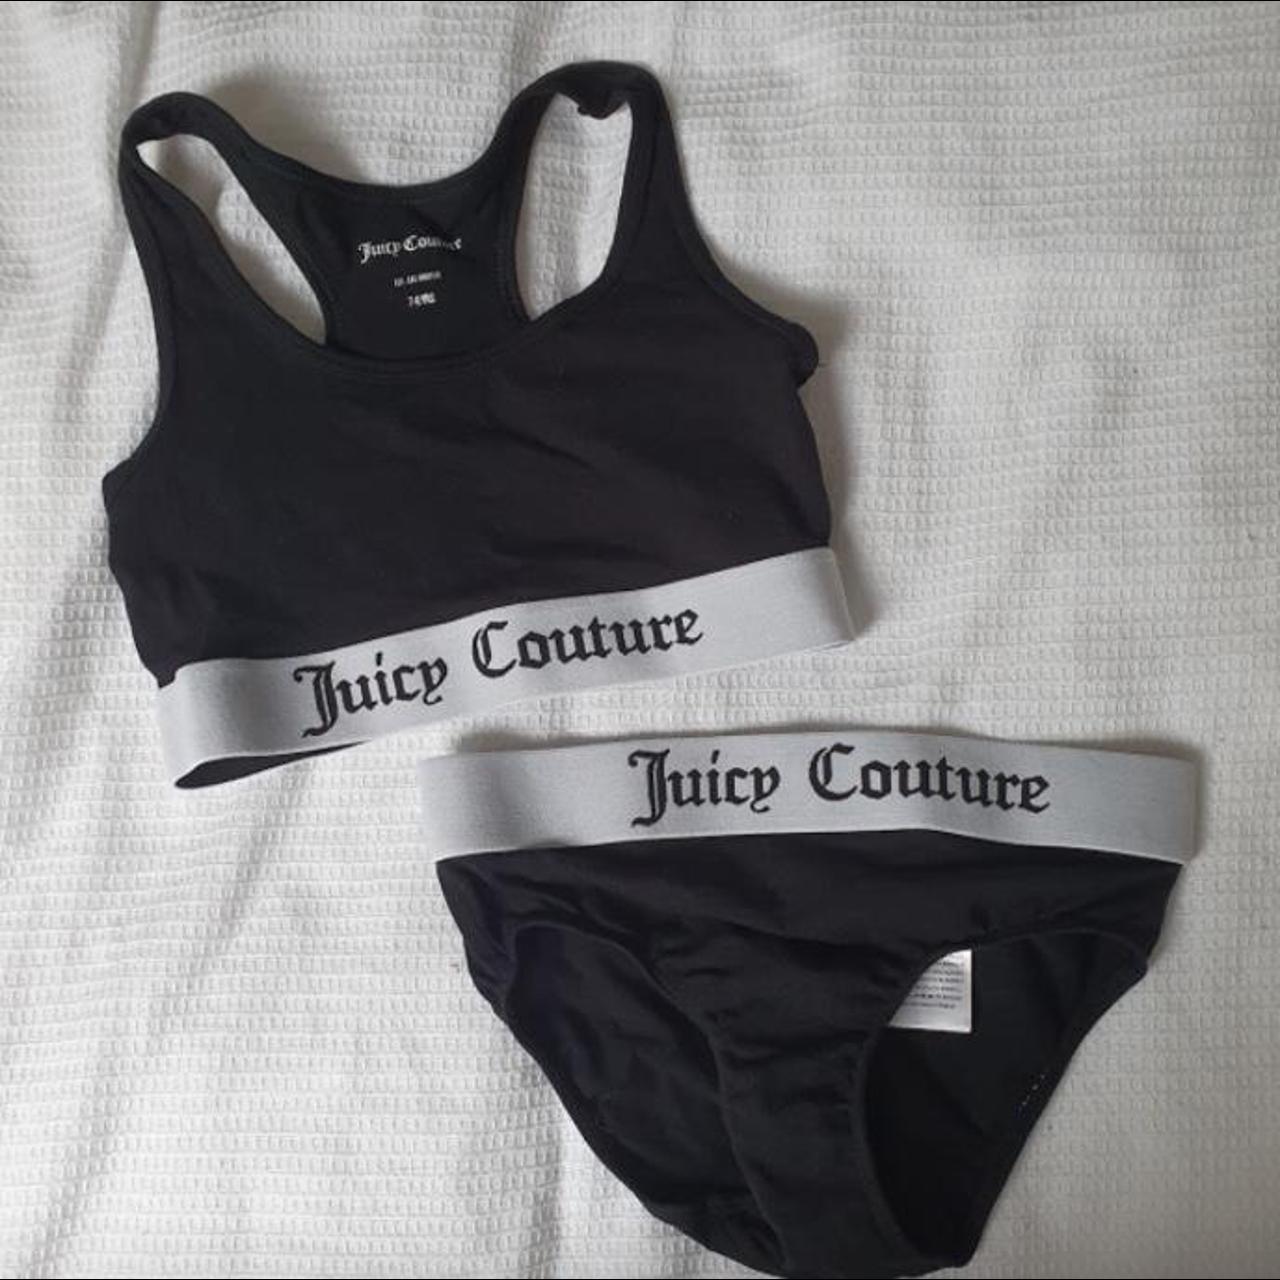 Juicy Couture White Panties for Women